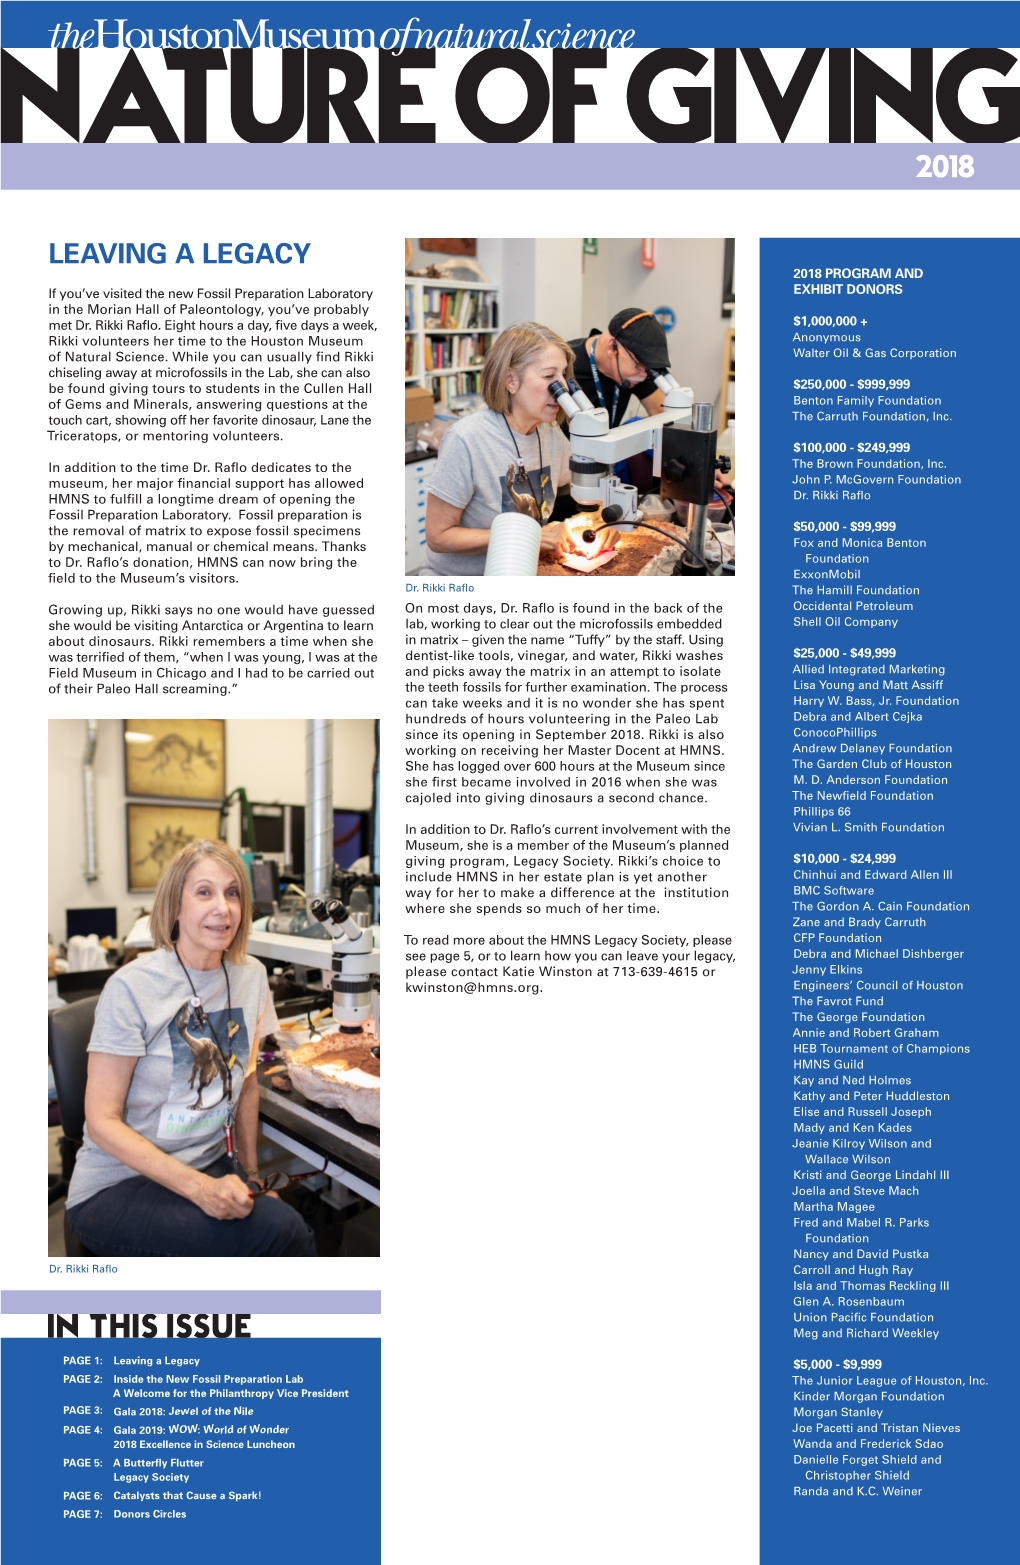 IN THIS ISSUE Meg and Richard Weekley PAGE 1: Leaving a Legacy $5,000 - $9,999 PAGE 2: Inside the New Fossil Preparation Lab the Junior League of Houston, Inc